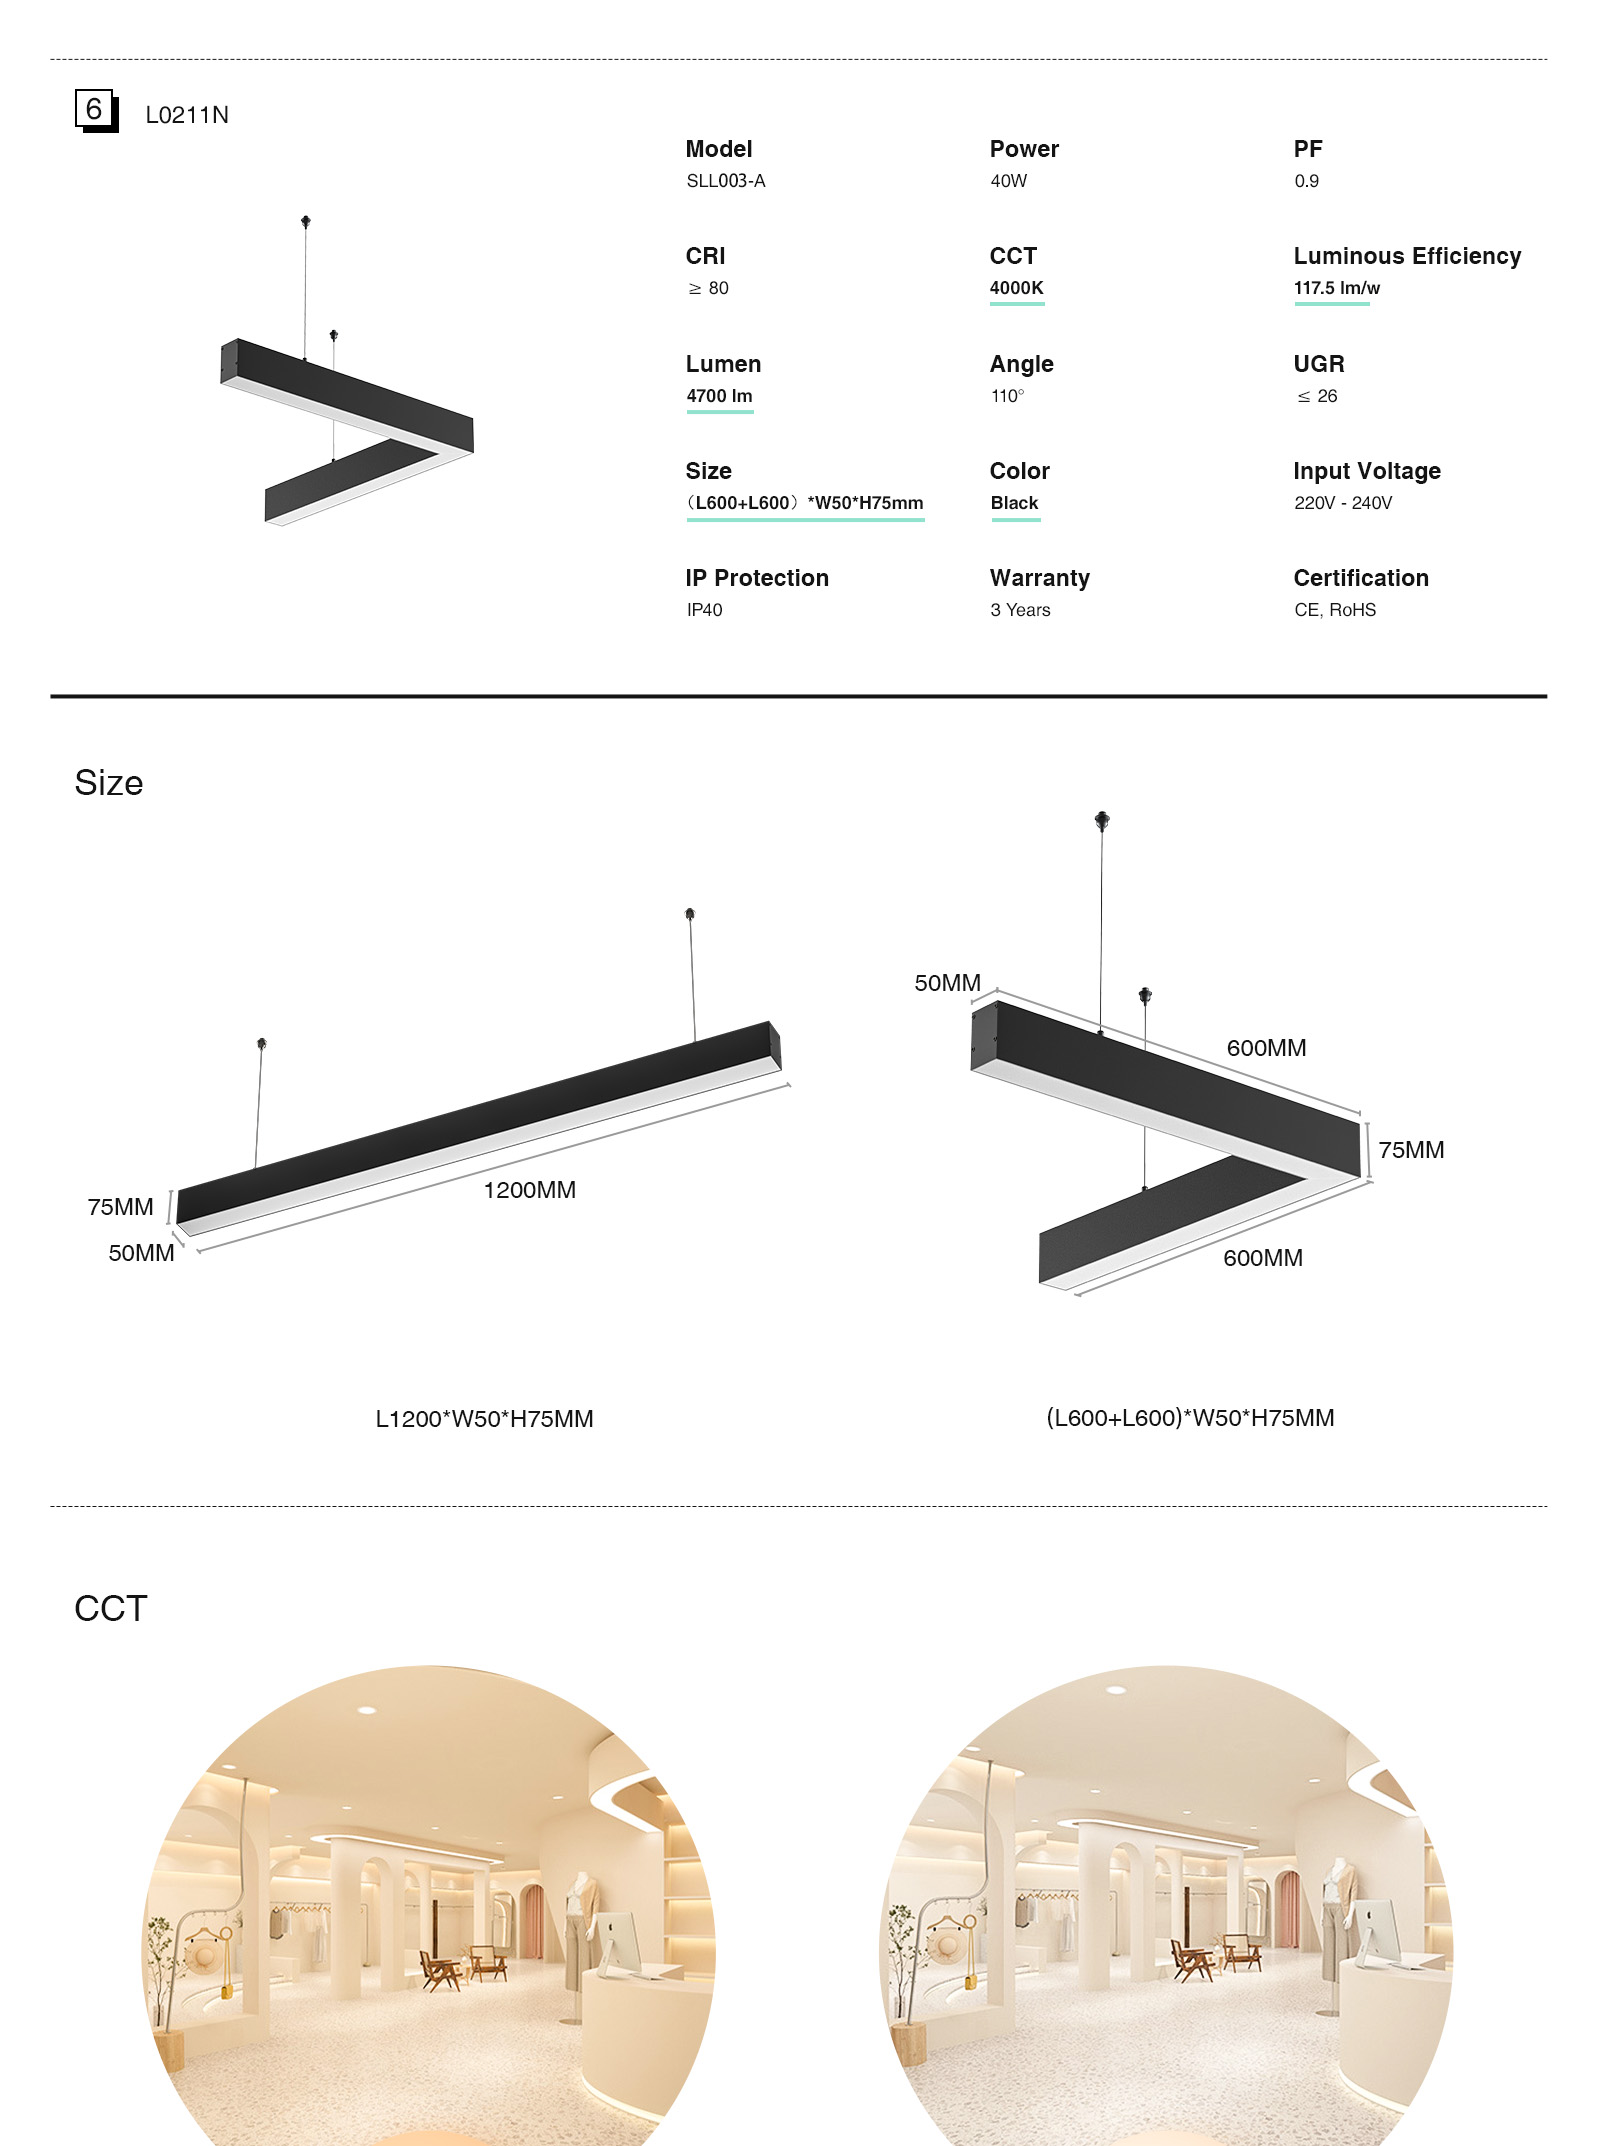 Dimmable Daylight LED Linear Pendant Lights White 40W 4000K 5000LM SLL003-A-L0211B by KOSOOM-Retail Store Lighting--3